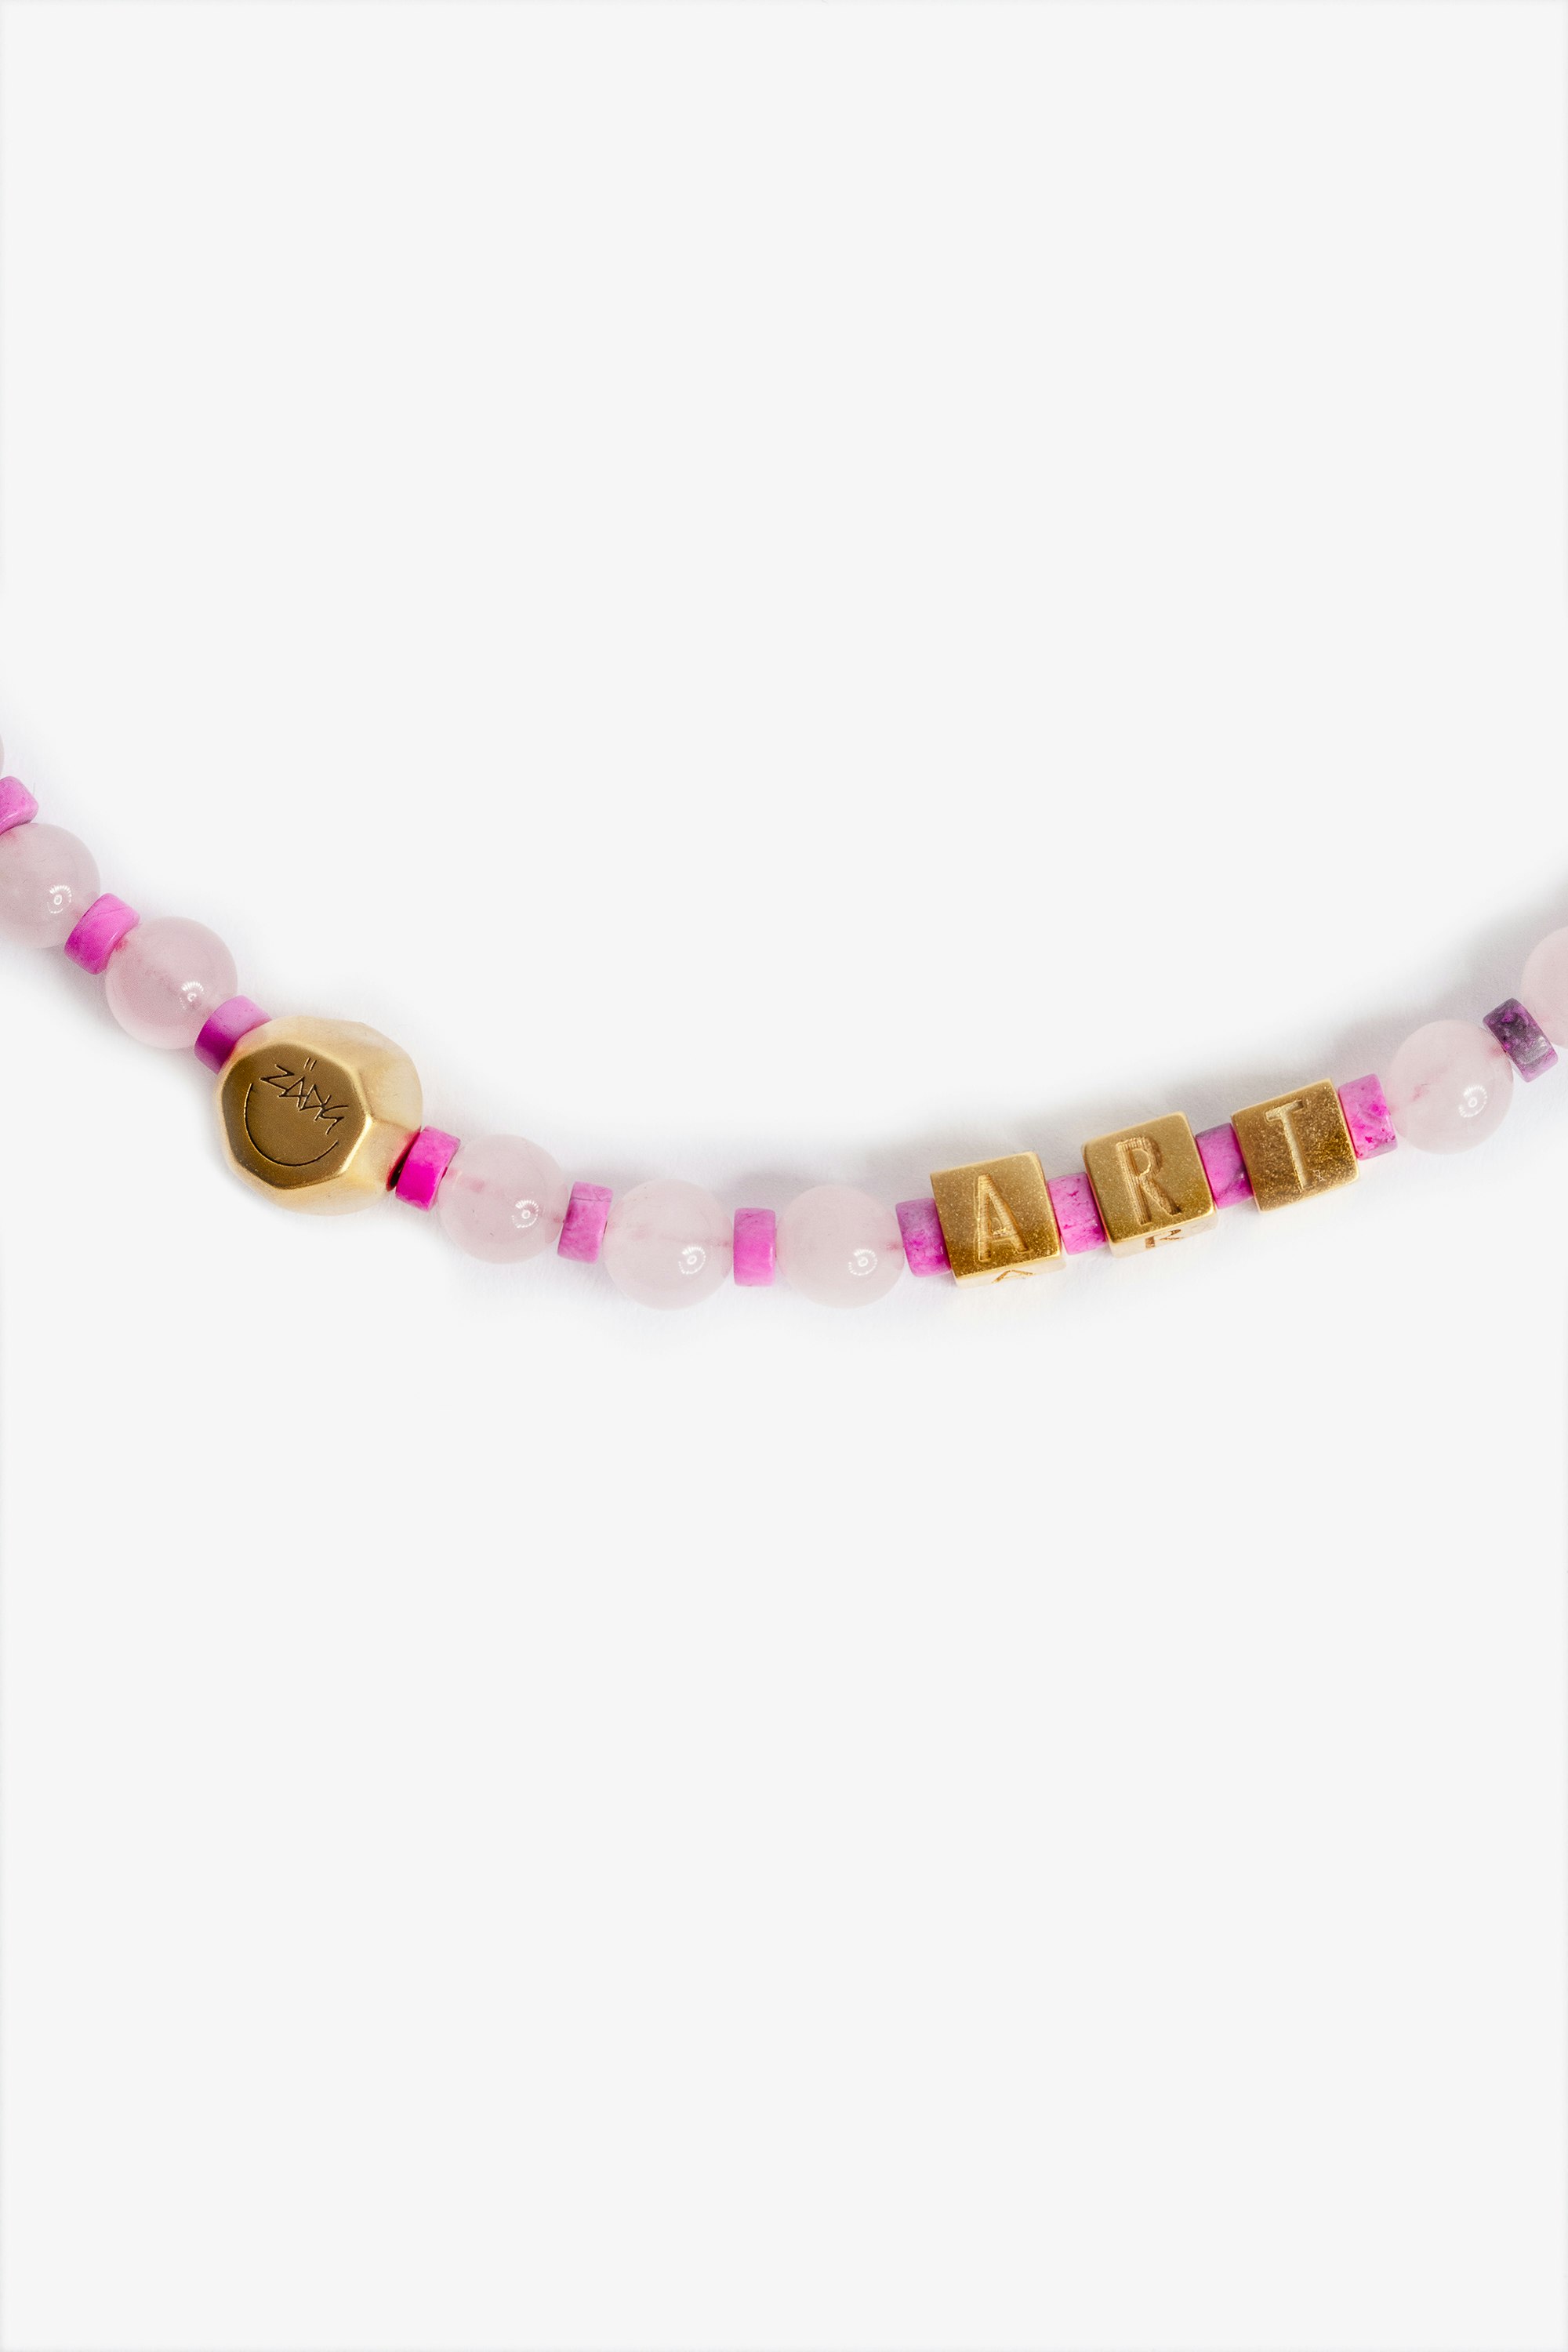 Mix n Match Art Message Necklace Women’s Art short necklace with pink and gold beads